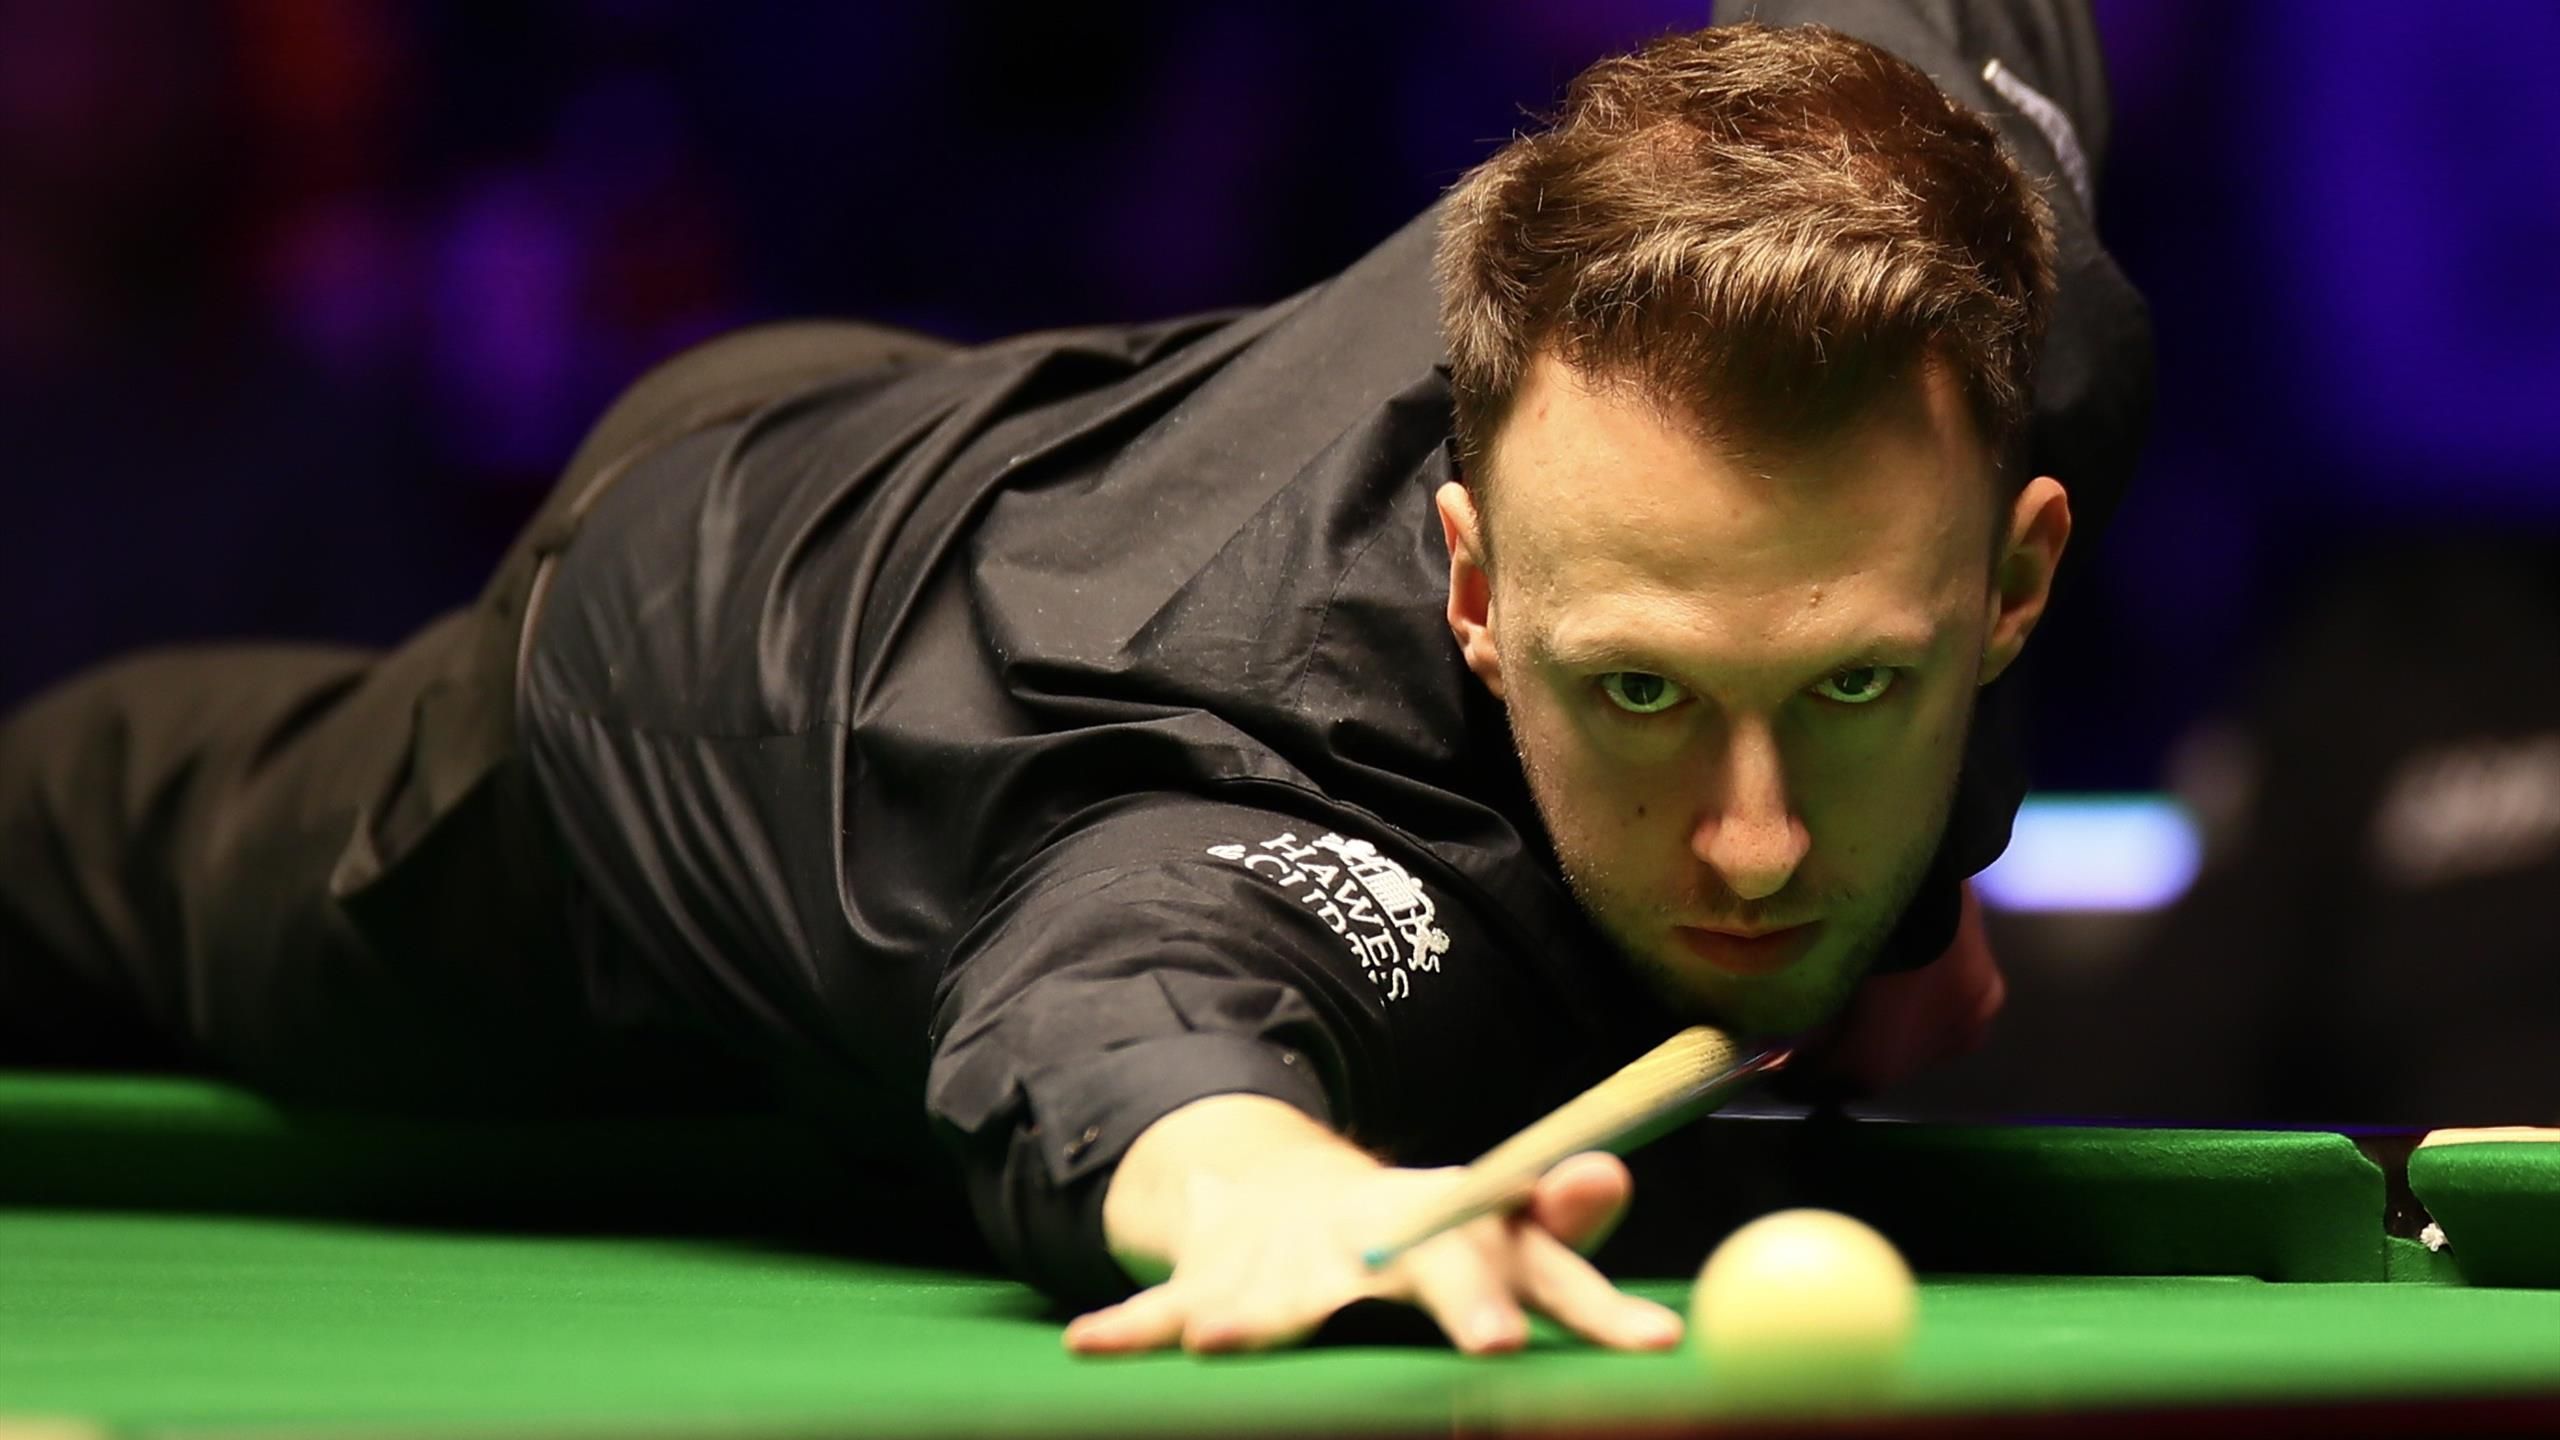 How Judd Trump produced arguably snookers greatest shot at German Masters 